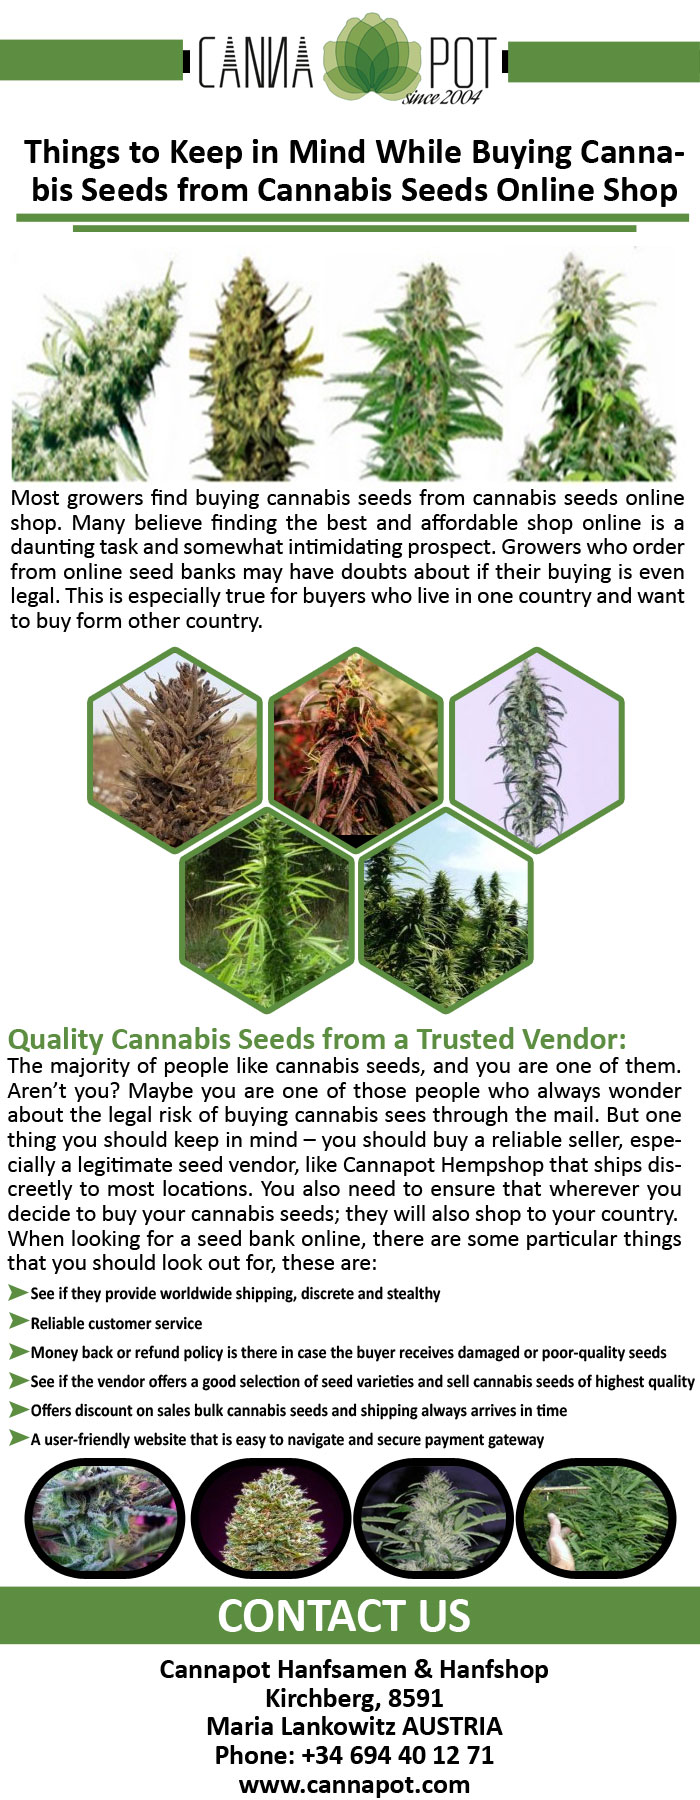 Things to Keep in Mind While Buying Cannabis Seeds from Cannabis Seeds Online Shop.jpg  by Cannapot